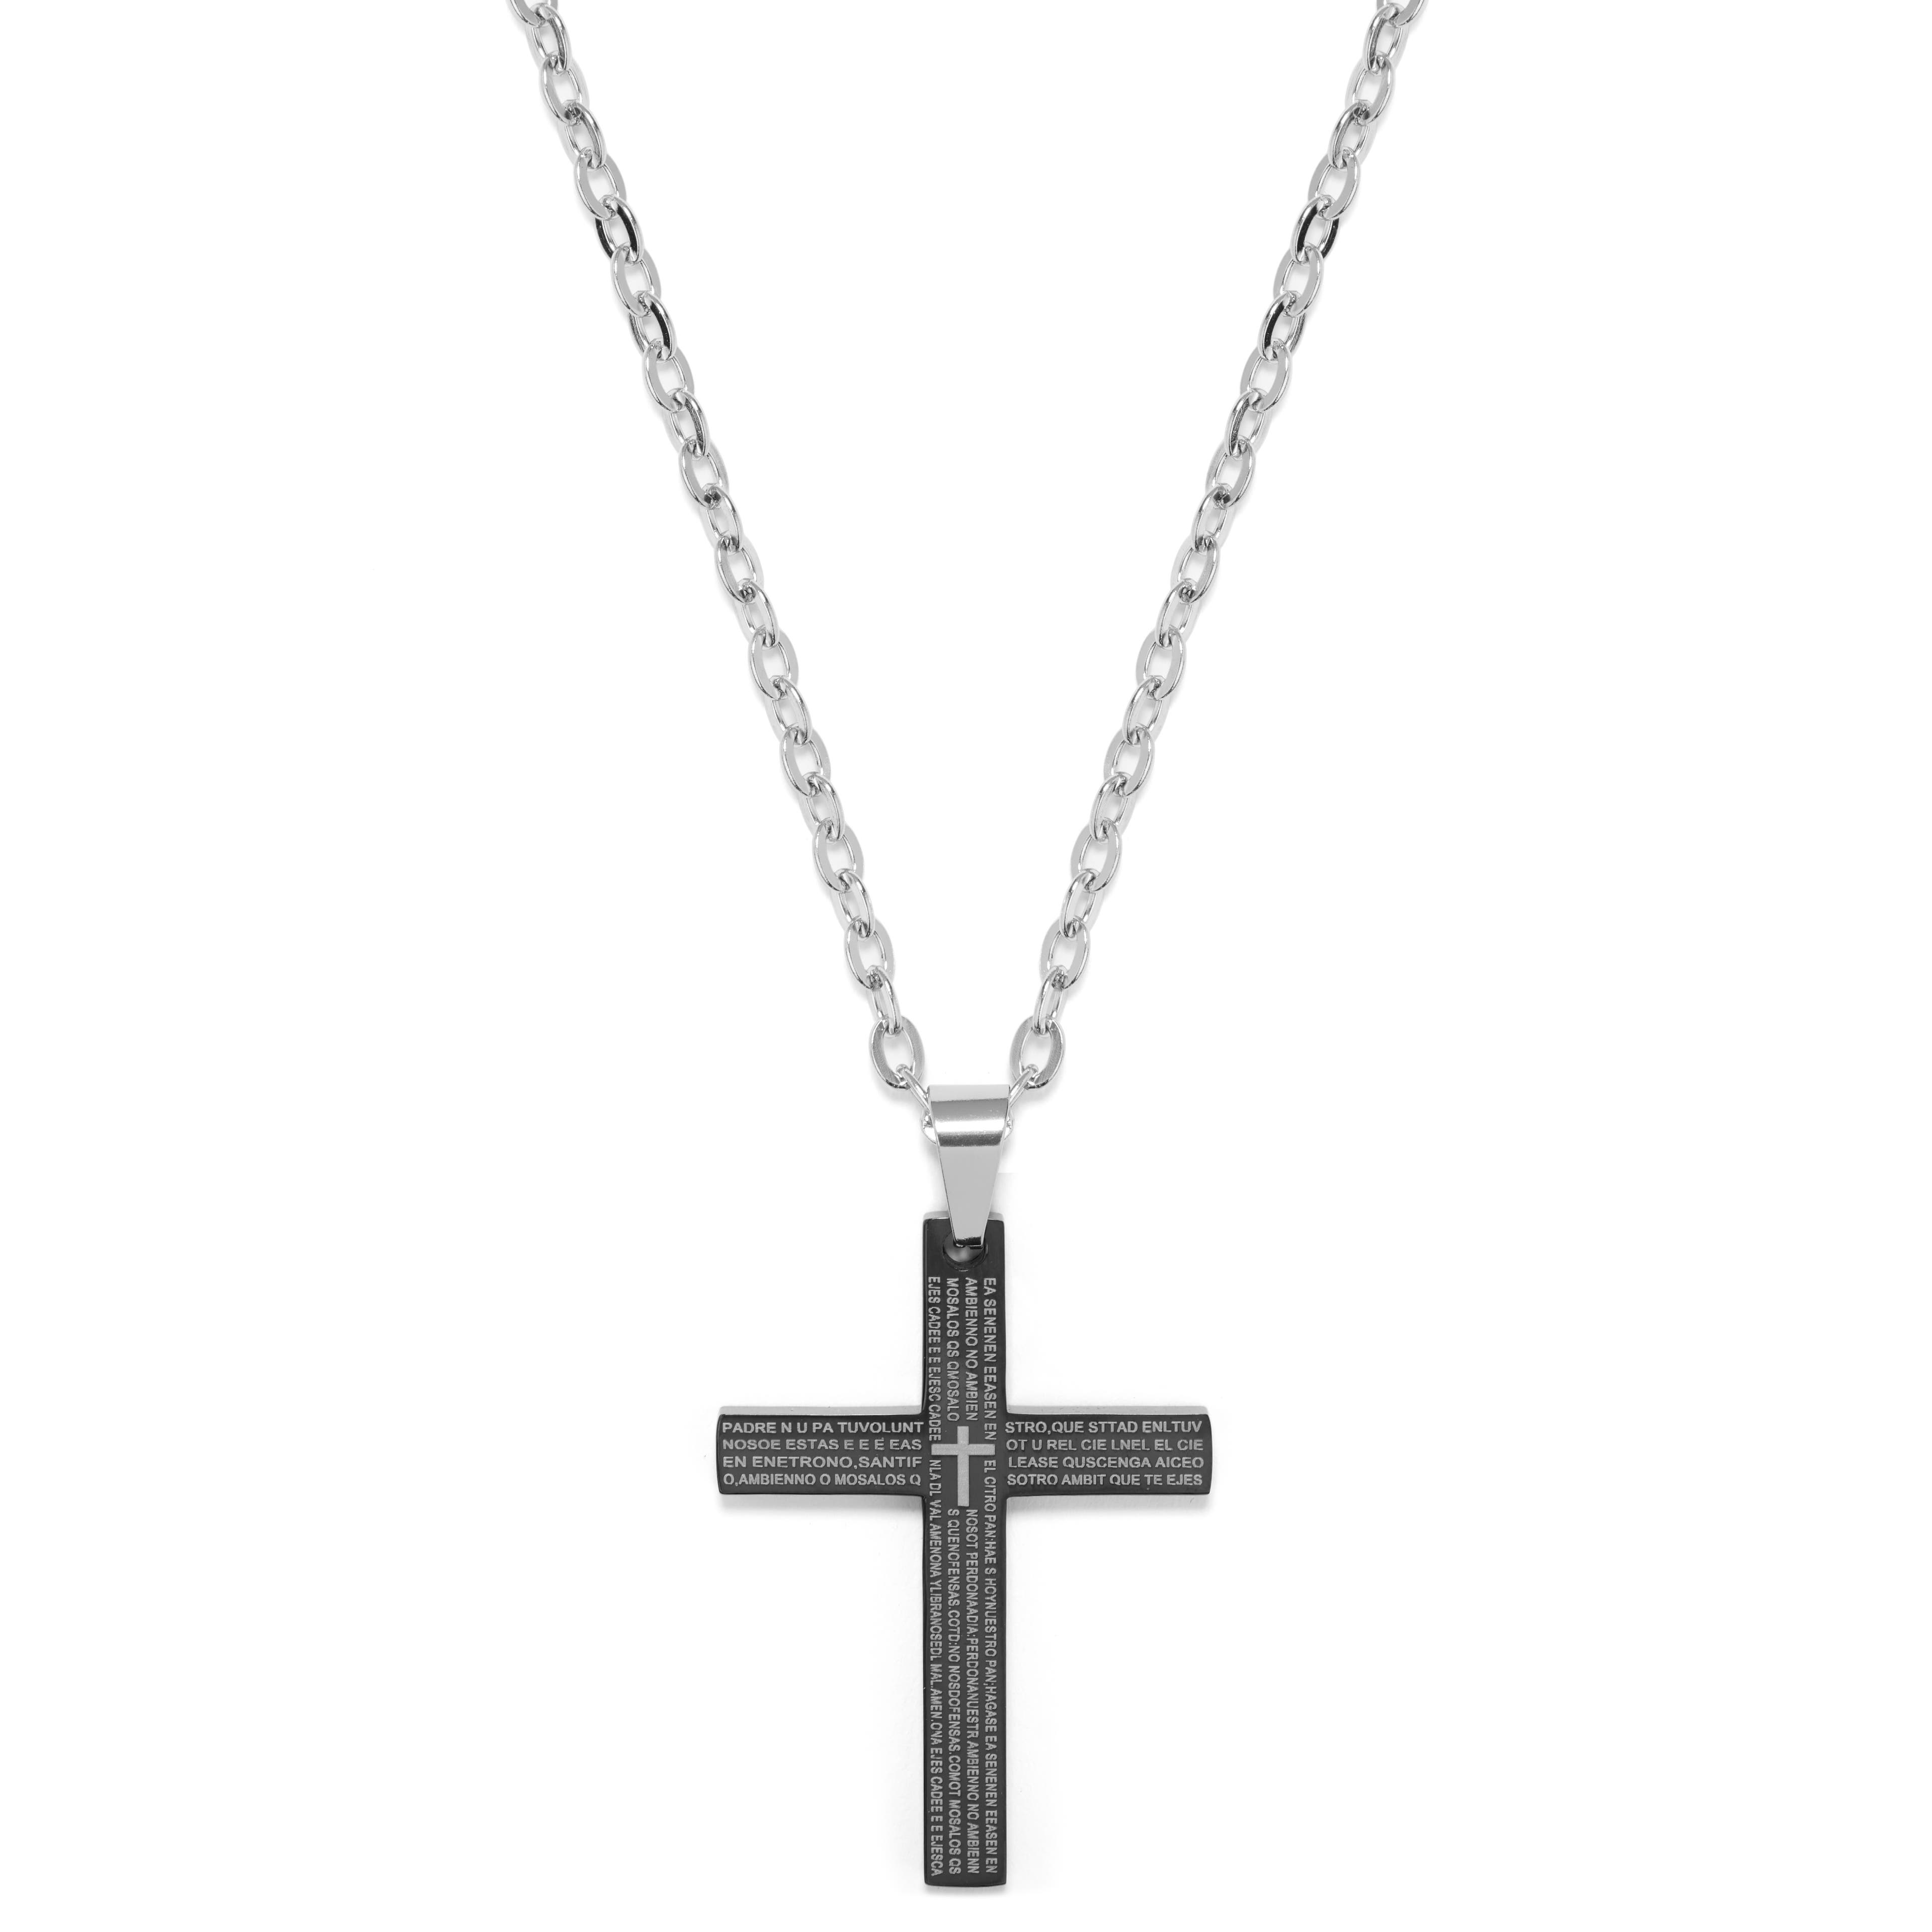 Silver-Tone Stainless Steel Small Black Cross Cable Chain Necklace